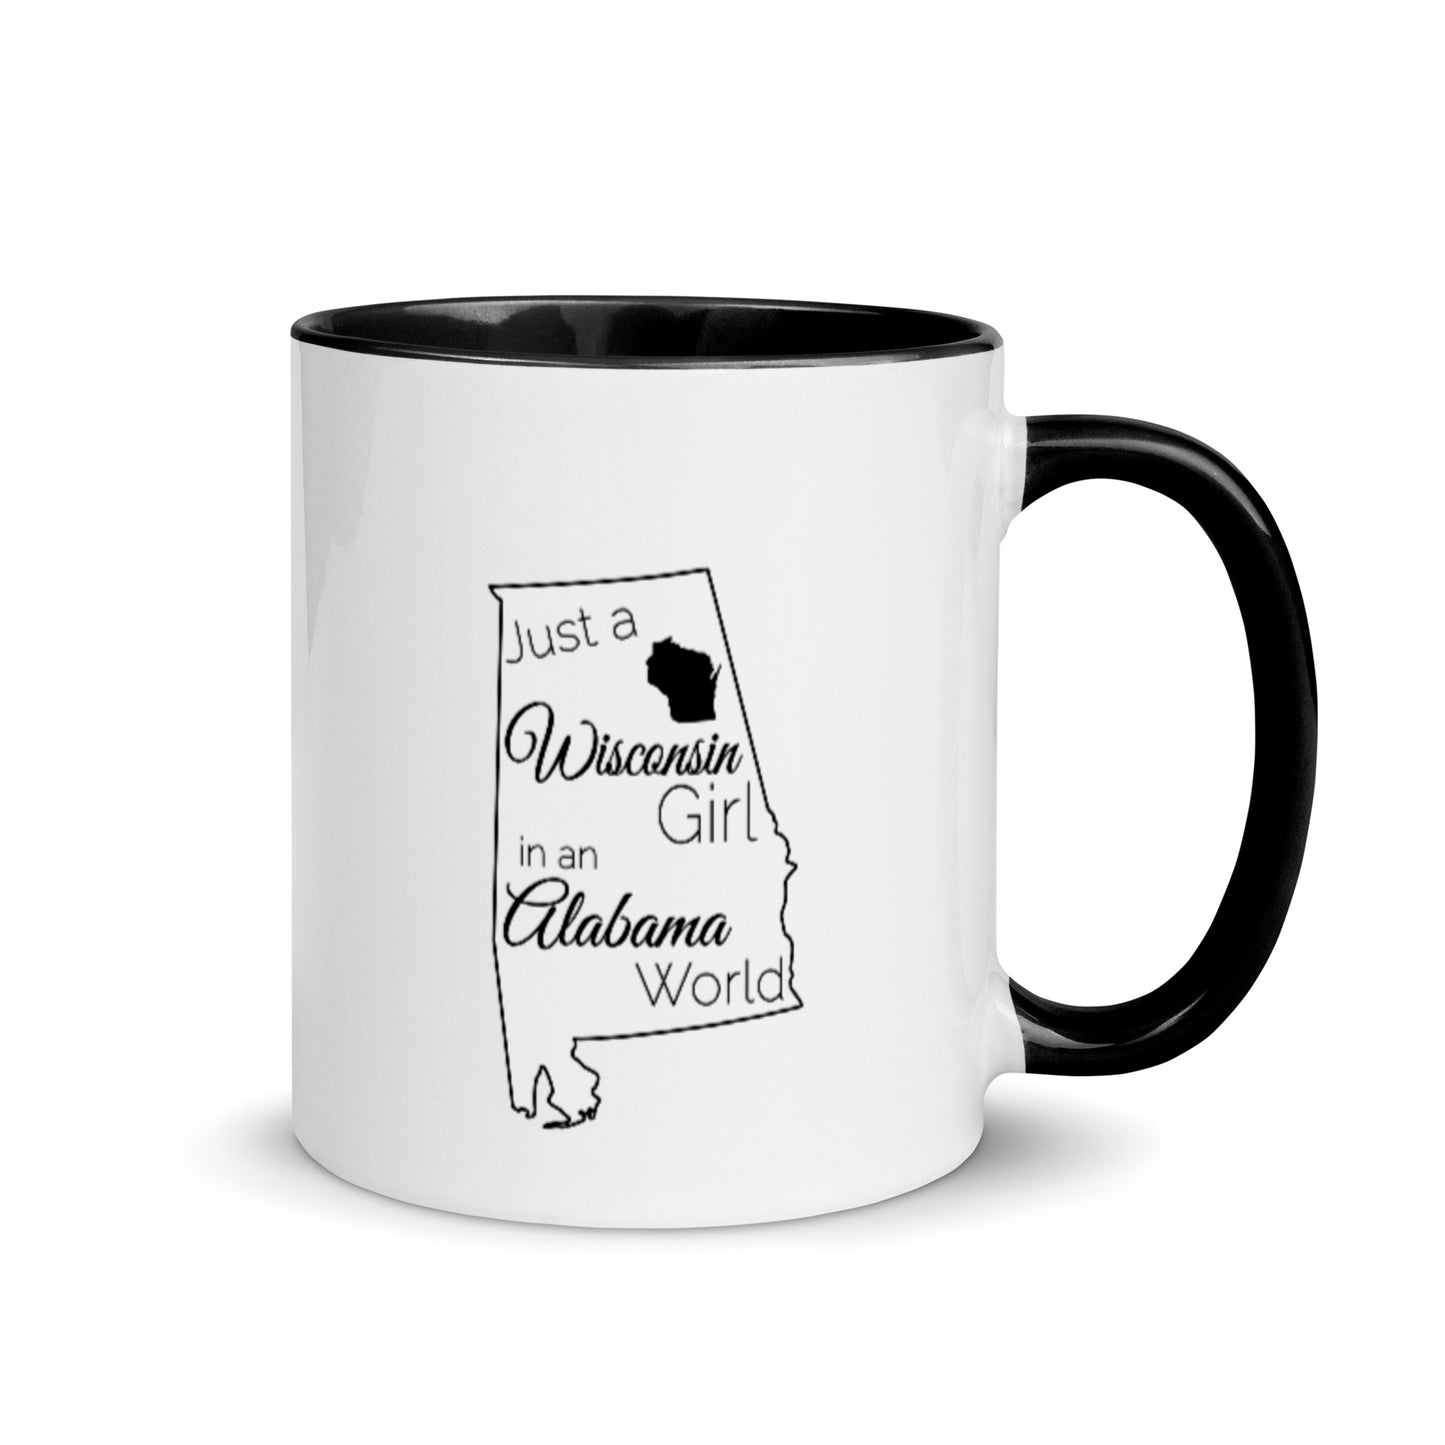 Just a Wisconsin Girl in an Alabama World Mug with Color Inside